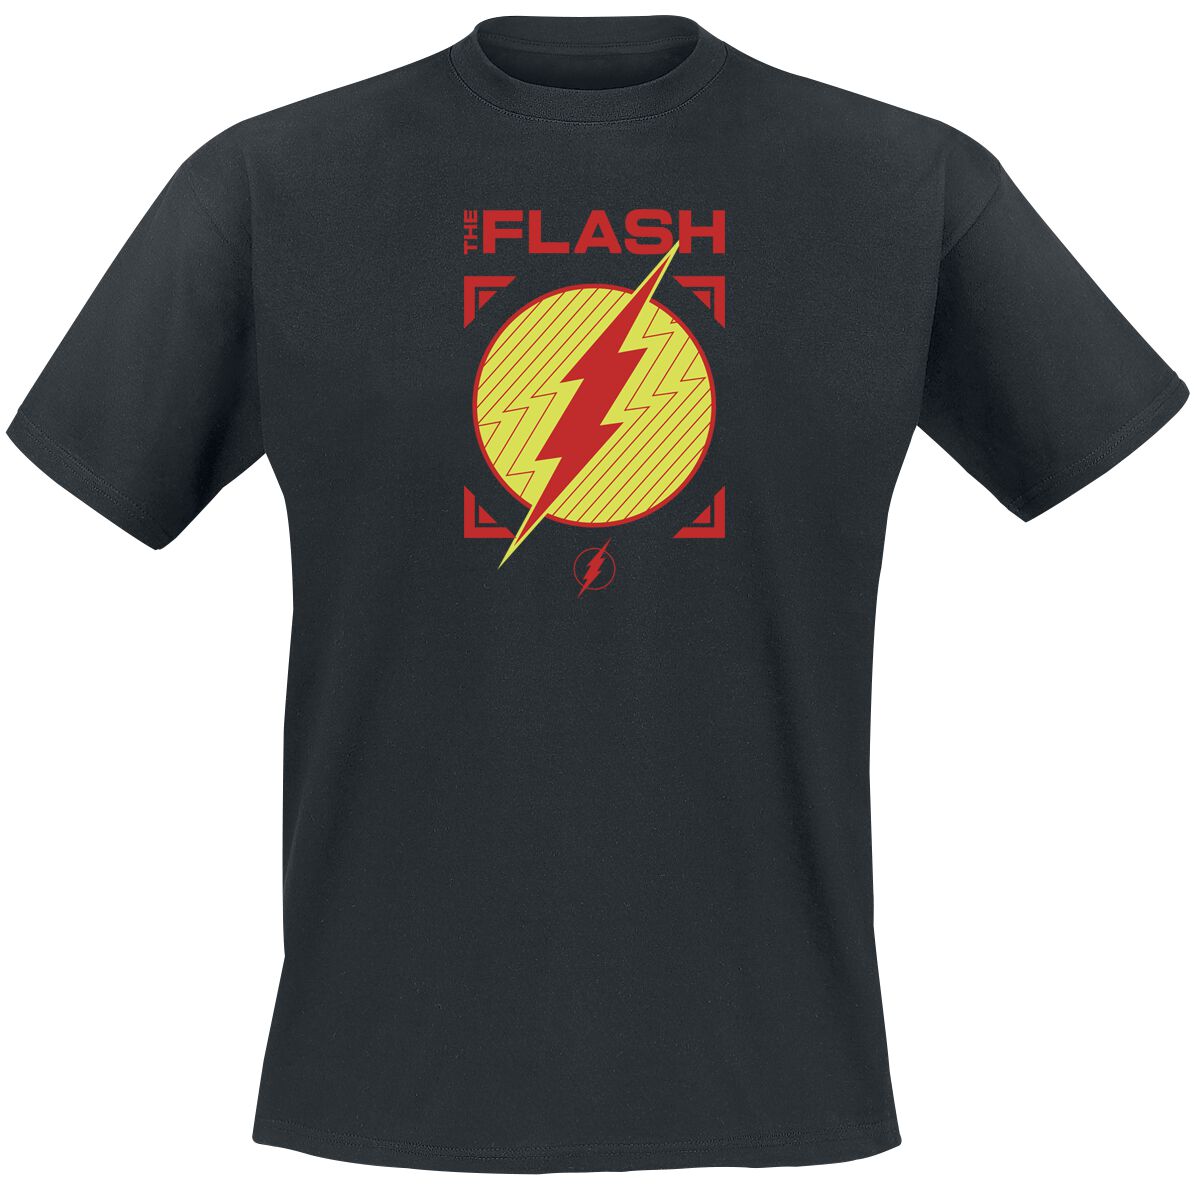 The Flash Flash - Central City All Stars T-Shirt schwarz in S